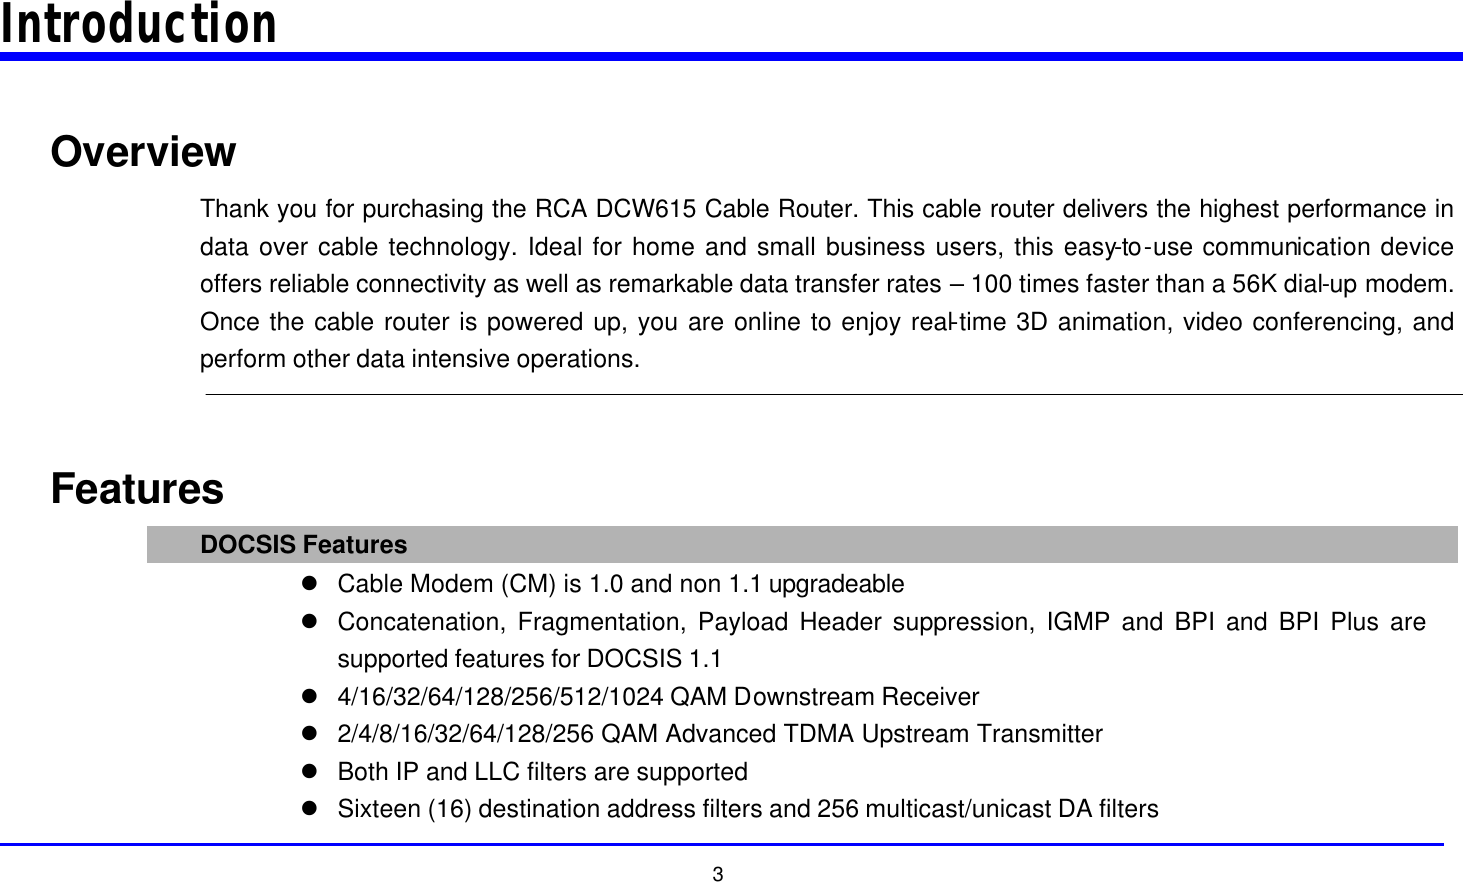  3 Introduction  Overview Thank you for purchasing the RCA DCW615 Cable Router. This cable router delivers the highest performance in data over cable technology. Ideal for home and small business users, this easy-to-use communication device offers reliable connectivity as well as remarkable data transfer rates – 100 times faster than a 56K dial-up modem. Once the cable router is powered up, you are online to enjoy real-time 3D animation, video conferencing, and perform other data intensive operations.   Features DOCSIS Features l Cable Modem (CM) is 1.0 and non 1.1 upgradeable l Concatenation, Fragmentation, Payload Header suppression, IGMP and BPI and BPI Plus are supported features for DOCSIS 1.1 l 4/16/32/64/128/256/512/1024 QAM Downstream Receiver l 2/4/8/16/32/64/128/256 QAM Advanced TDMA Upstream Transmitter l Both IP and LLC filters are supported l Sixteen (16) destination address filters and 256 multicast/unicast DA filters 